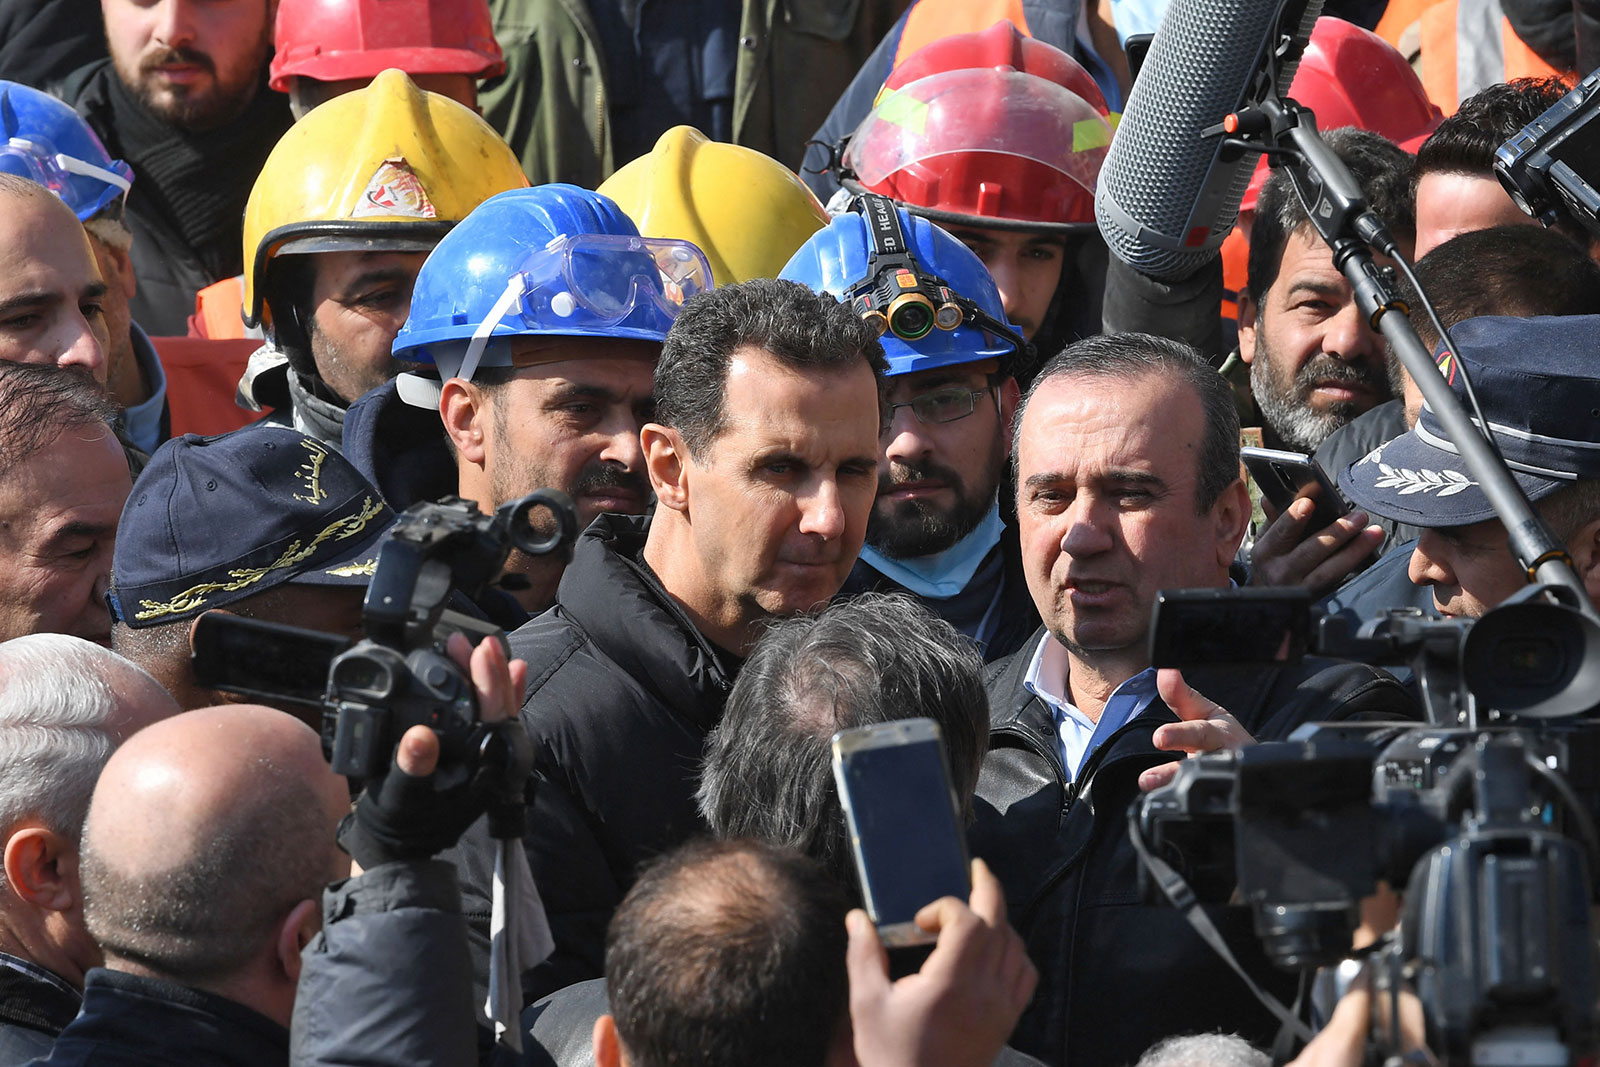 Syrian President al-Assad criticizes Western countries in first televised comments since Monday’s earthquake